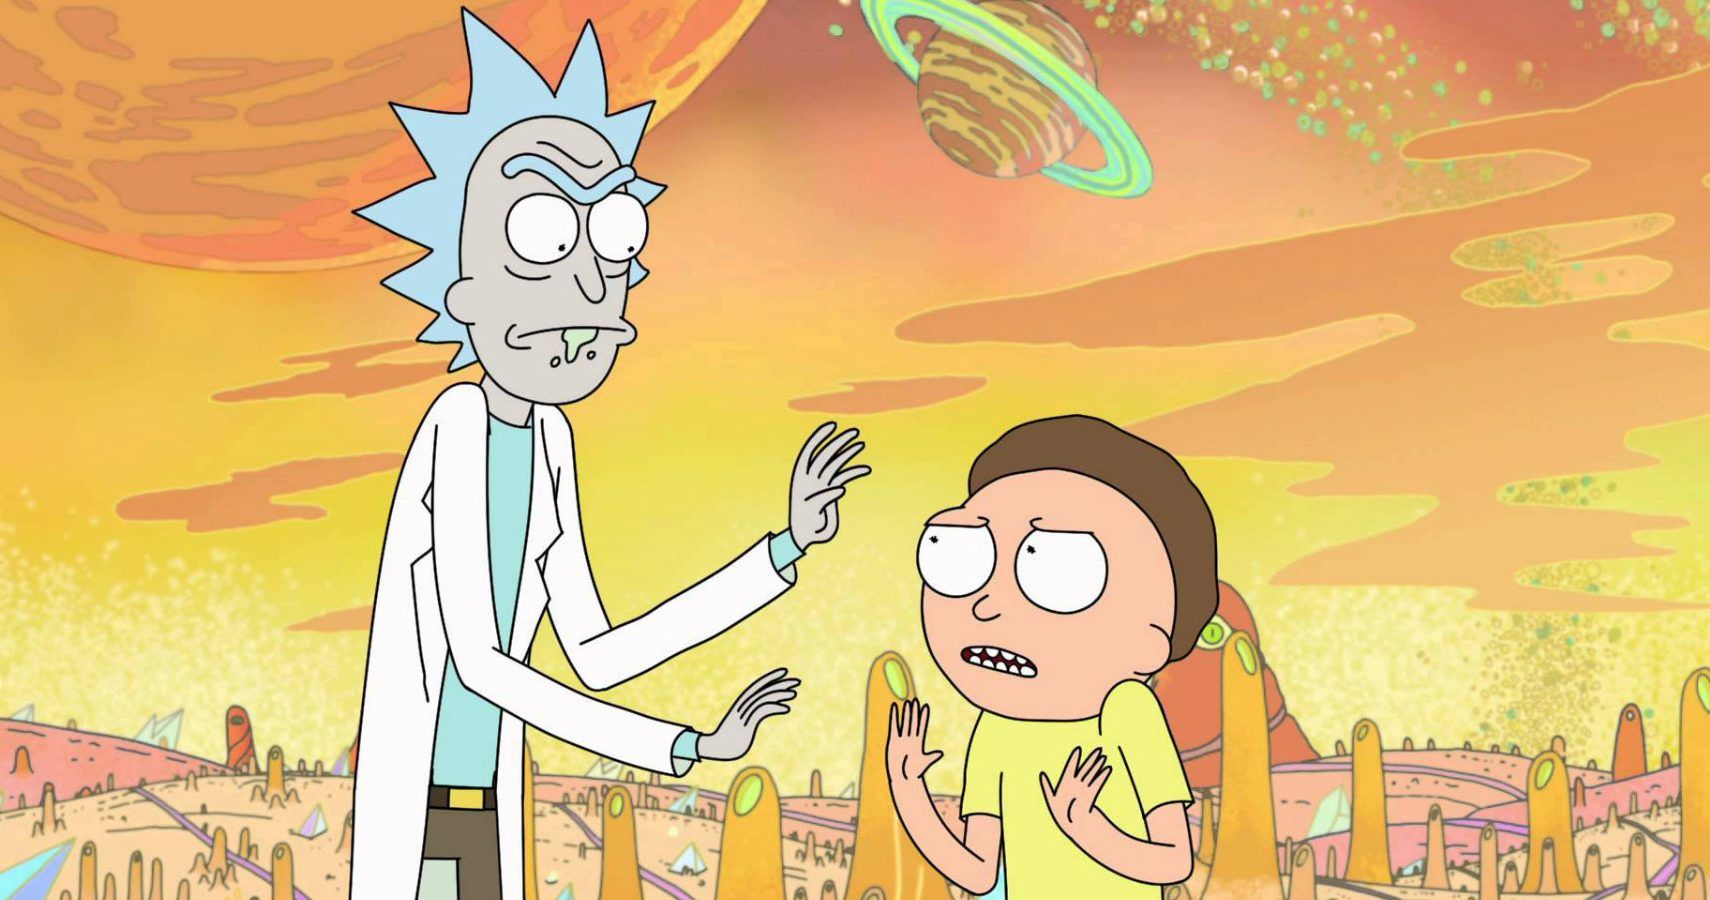 Rick and Morty (TV show)